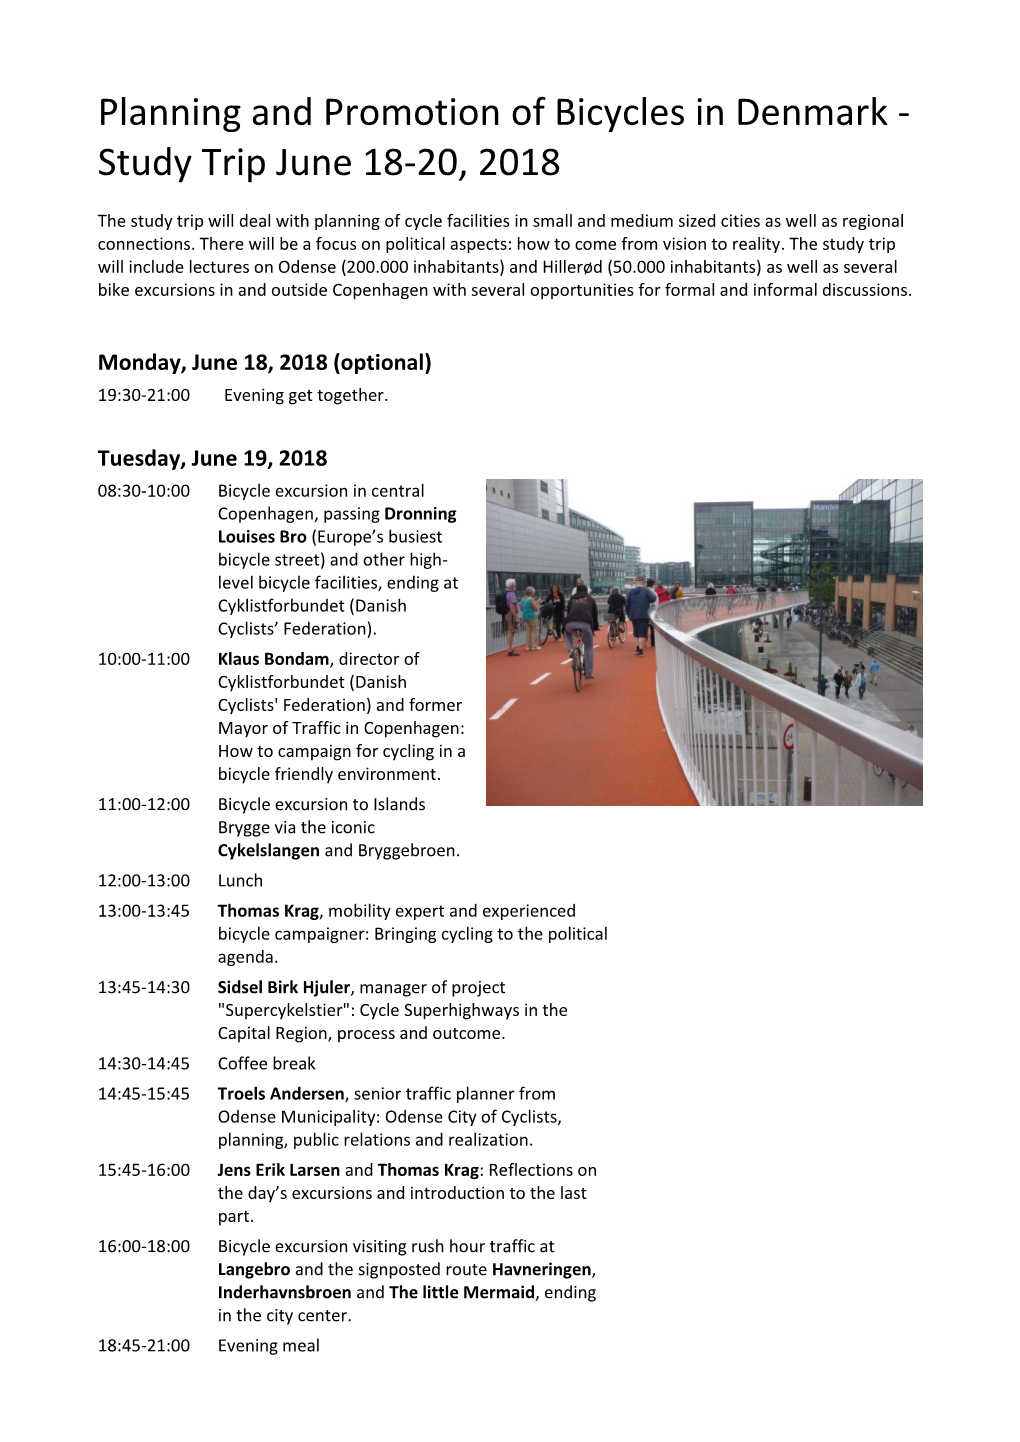 Planning and Promotion of Bicycles in Denmark - Study Trip June 18-20, 2018